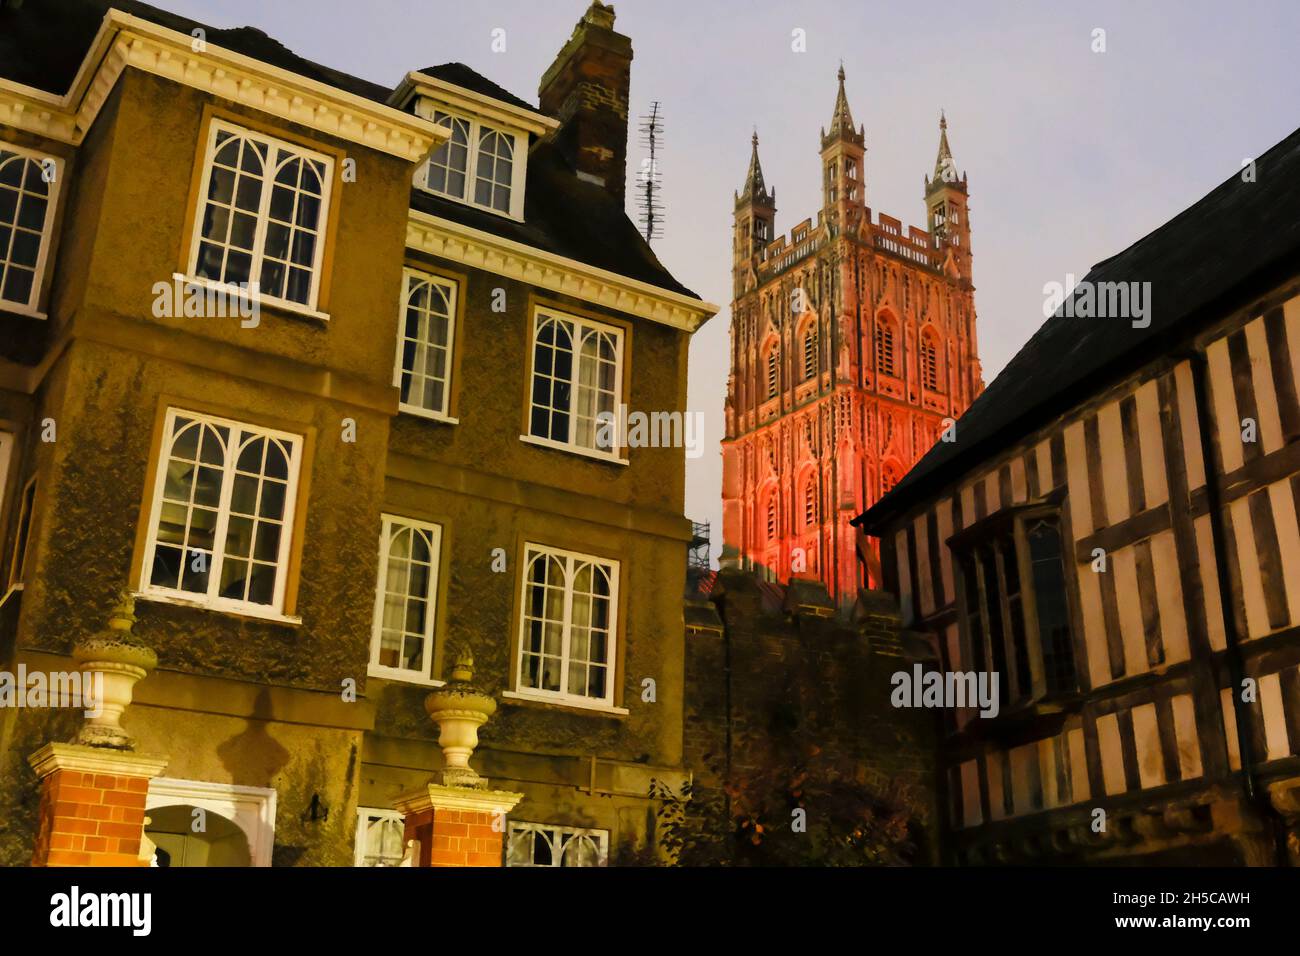 Gloucester, UK. 8th Nov, 2021. The tower of Gloucester Cathedral has been lit with red lights as an act of Remembrance. The 15th century tower is a focal point for people to remember those who have given their lives in previous conflicts. The tower from the courtyards Stock Photo